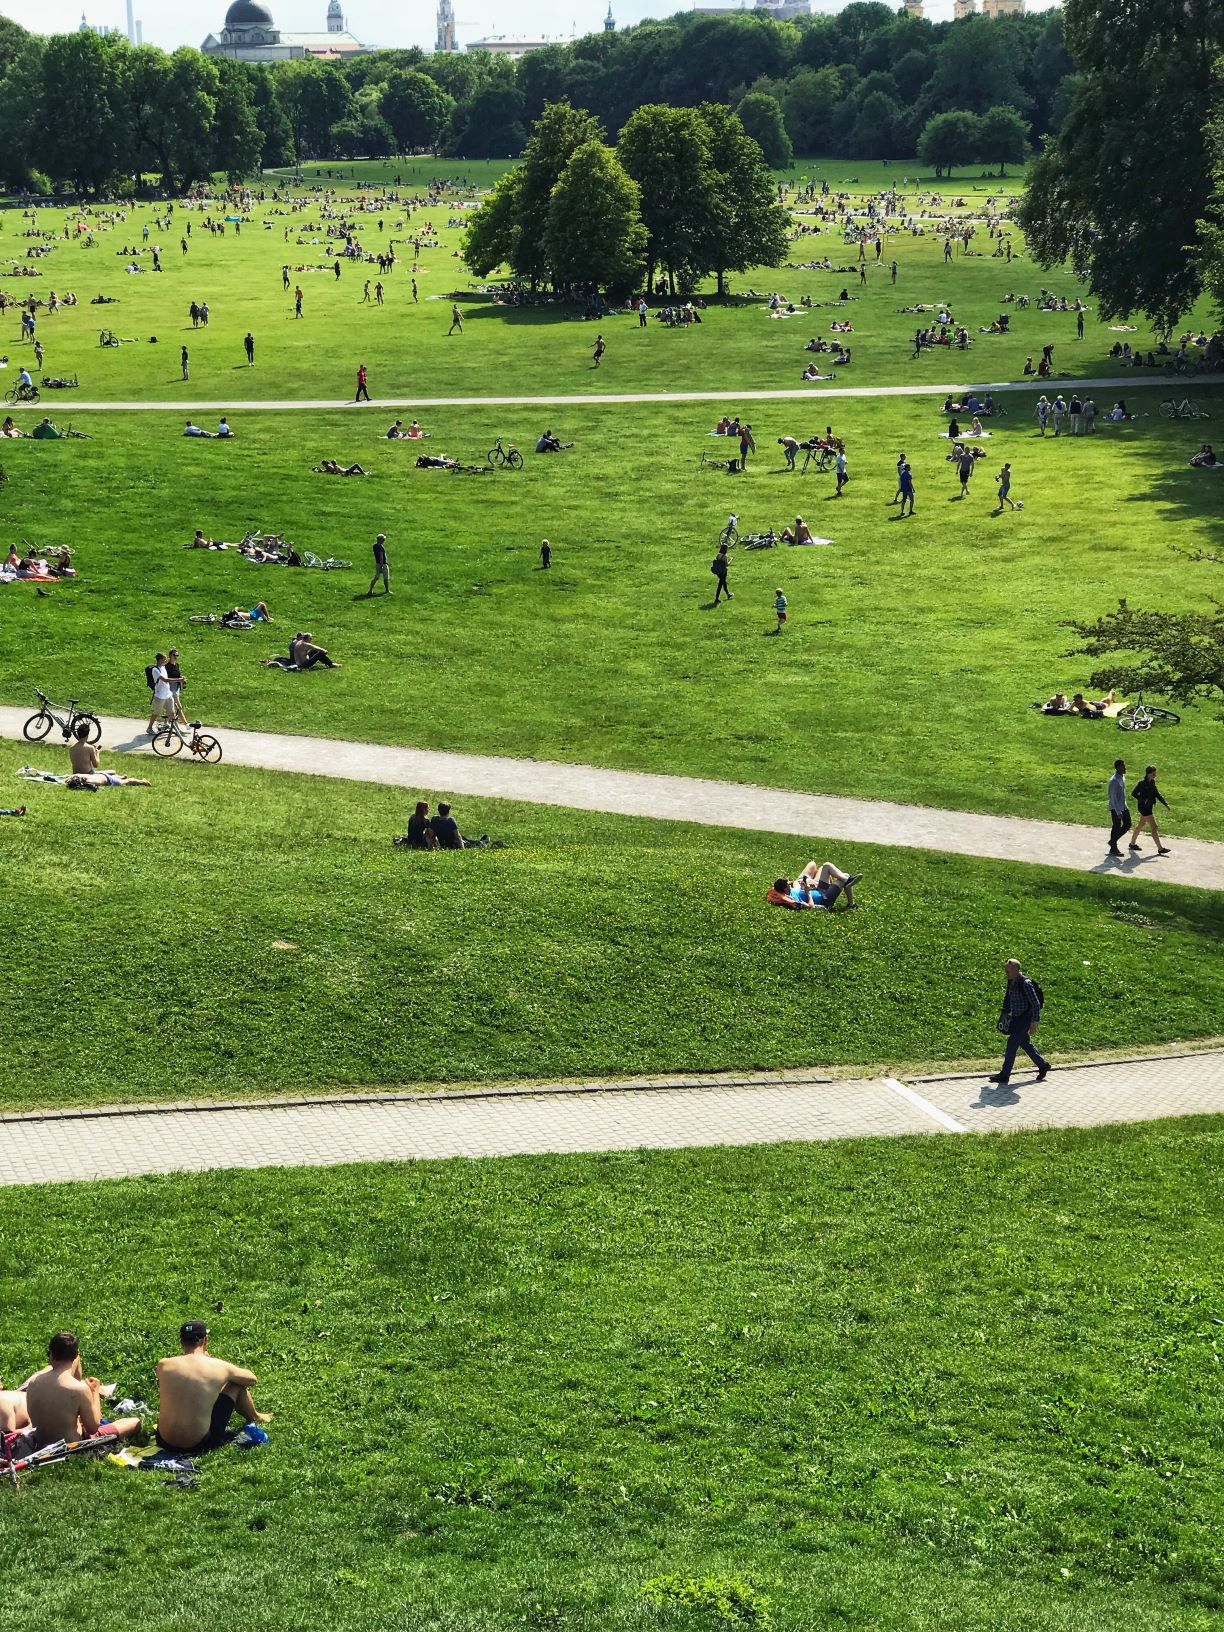 grassy hill with people sitting on it